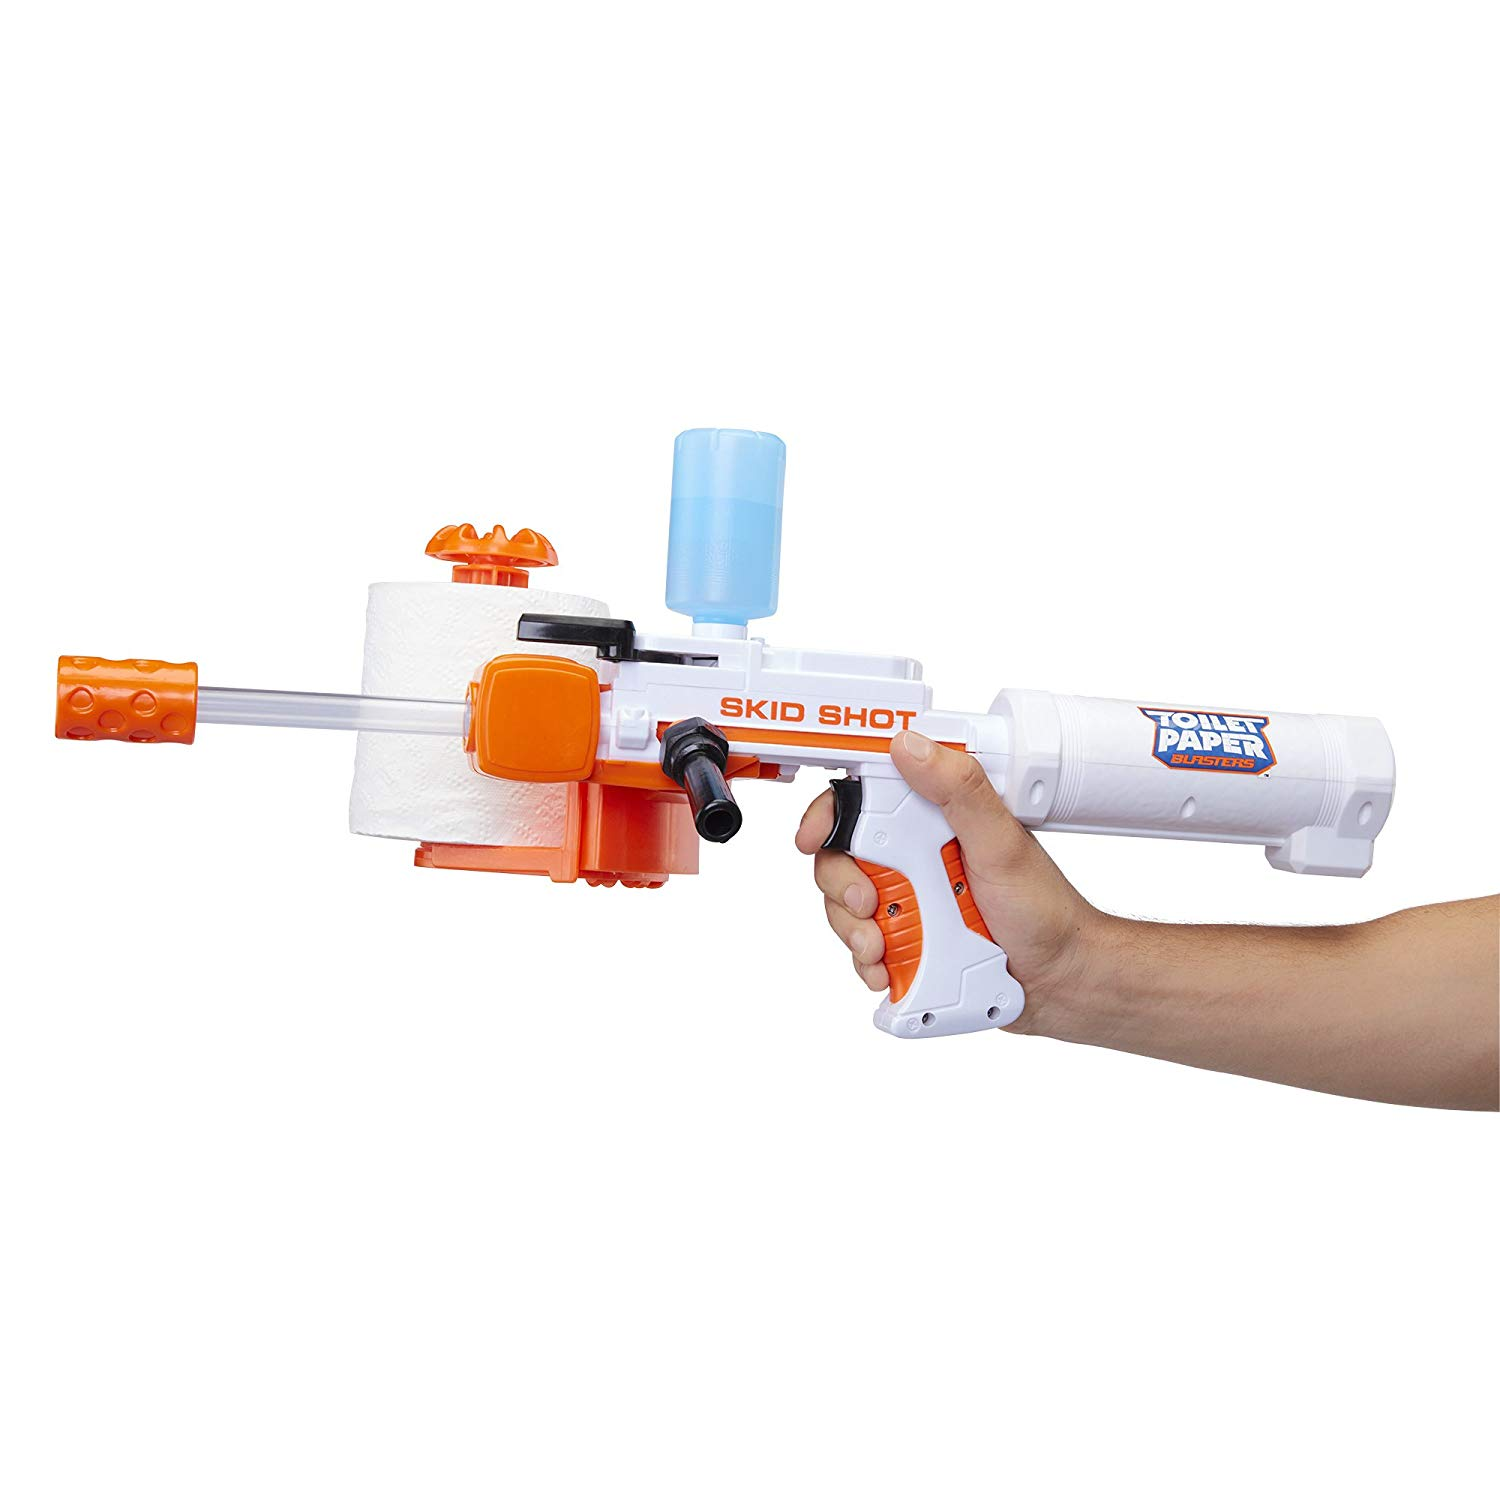 Your friends and enemies will know true terror under your toilet paper launching reign.<br><br>Become the villain you're meant to be with a TP launcher you can get <a href="https://amzn.to/2C55iVs" target="_blank" "nofollow">here</a>.